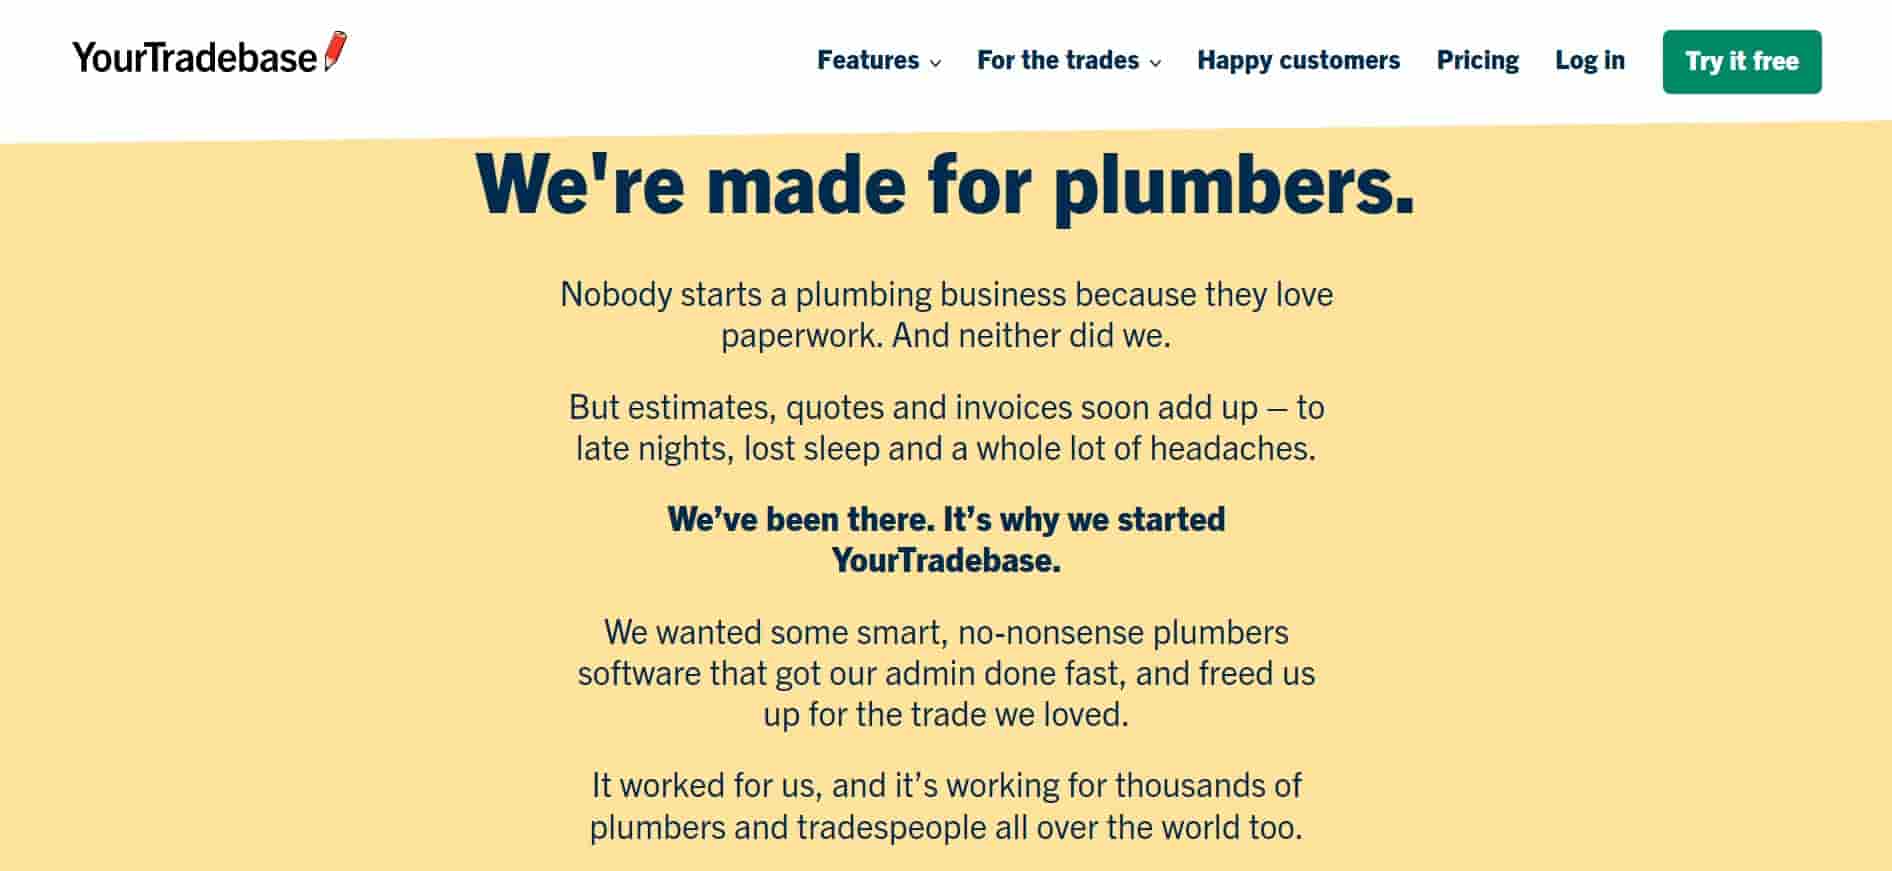 Image of YourTradebase's website mentioning 'we're made for plumbers'